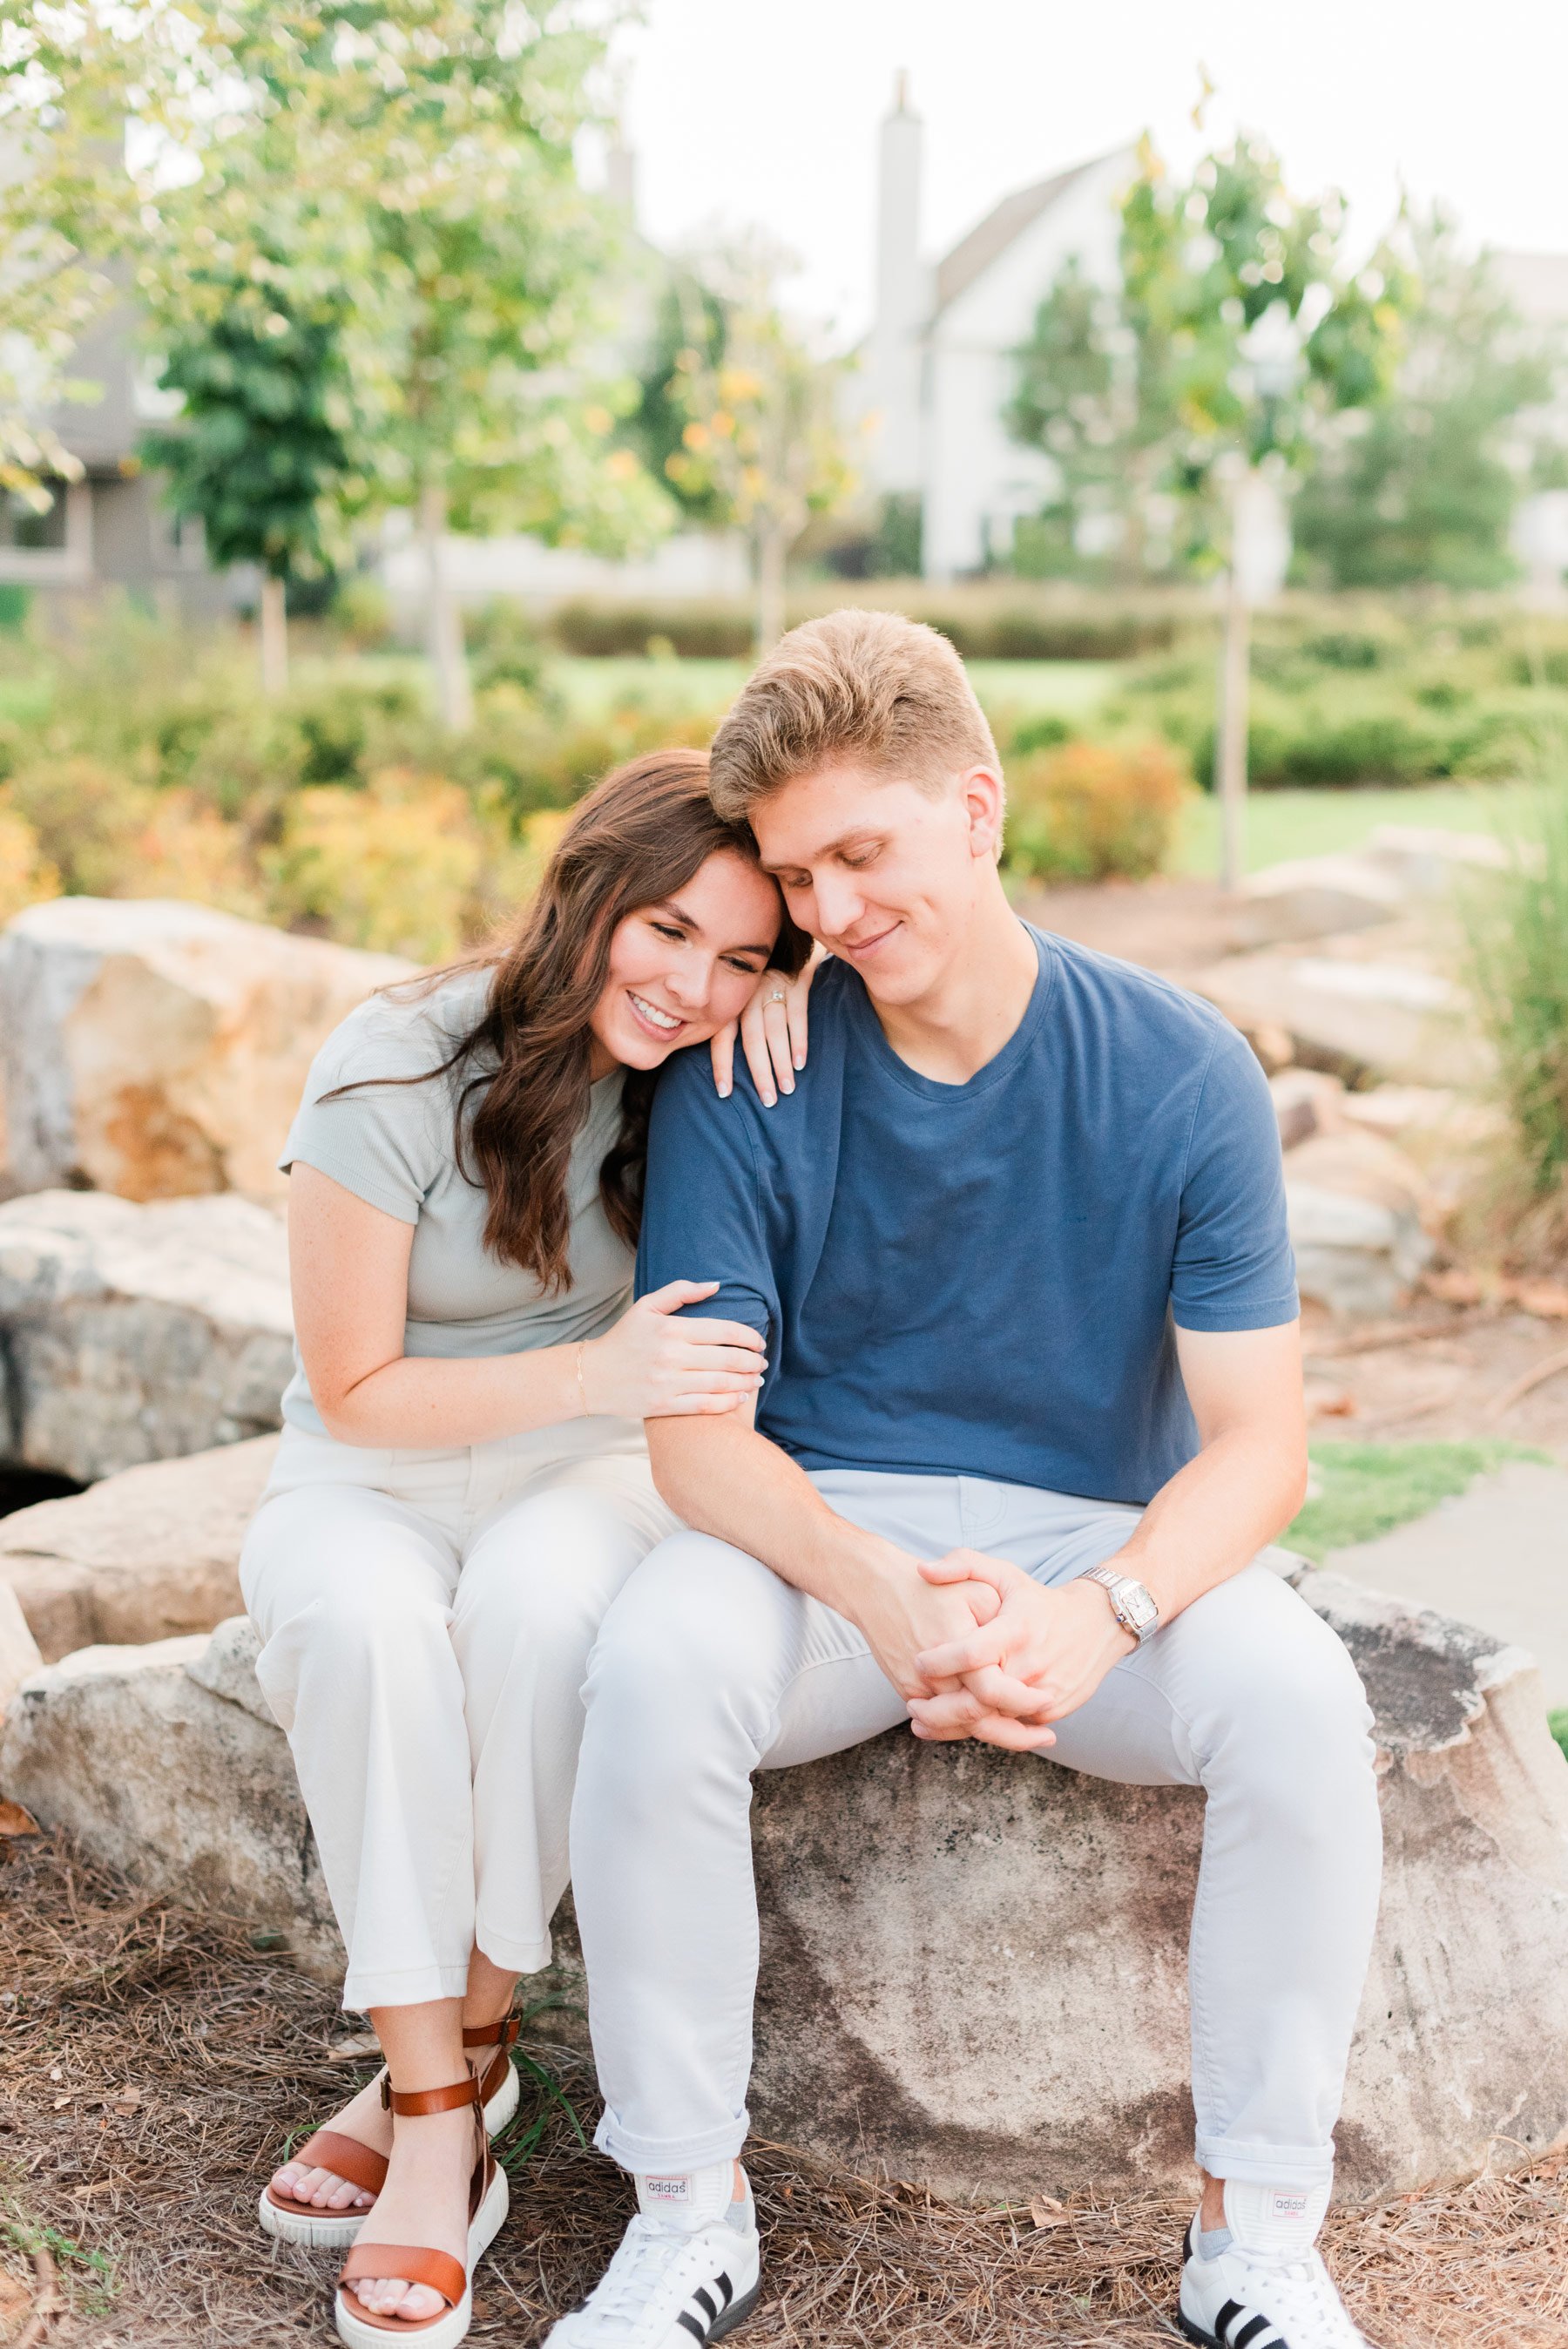    This cute couple snuggled up for romantic professional engagement photos in the park. #trilithstudios #georgiaweddingphotographer #fayettevillephotographer #fayettevilleengagementphotos #outdoorengagements #formalengagementphotos #reasonstobookeng